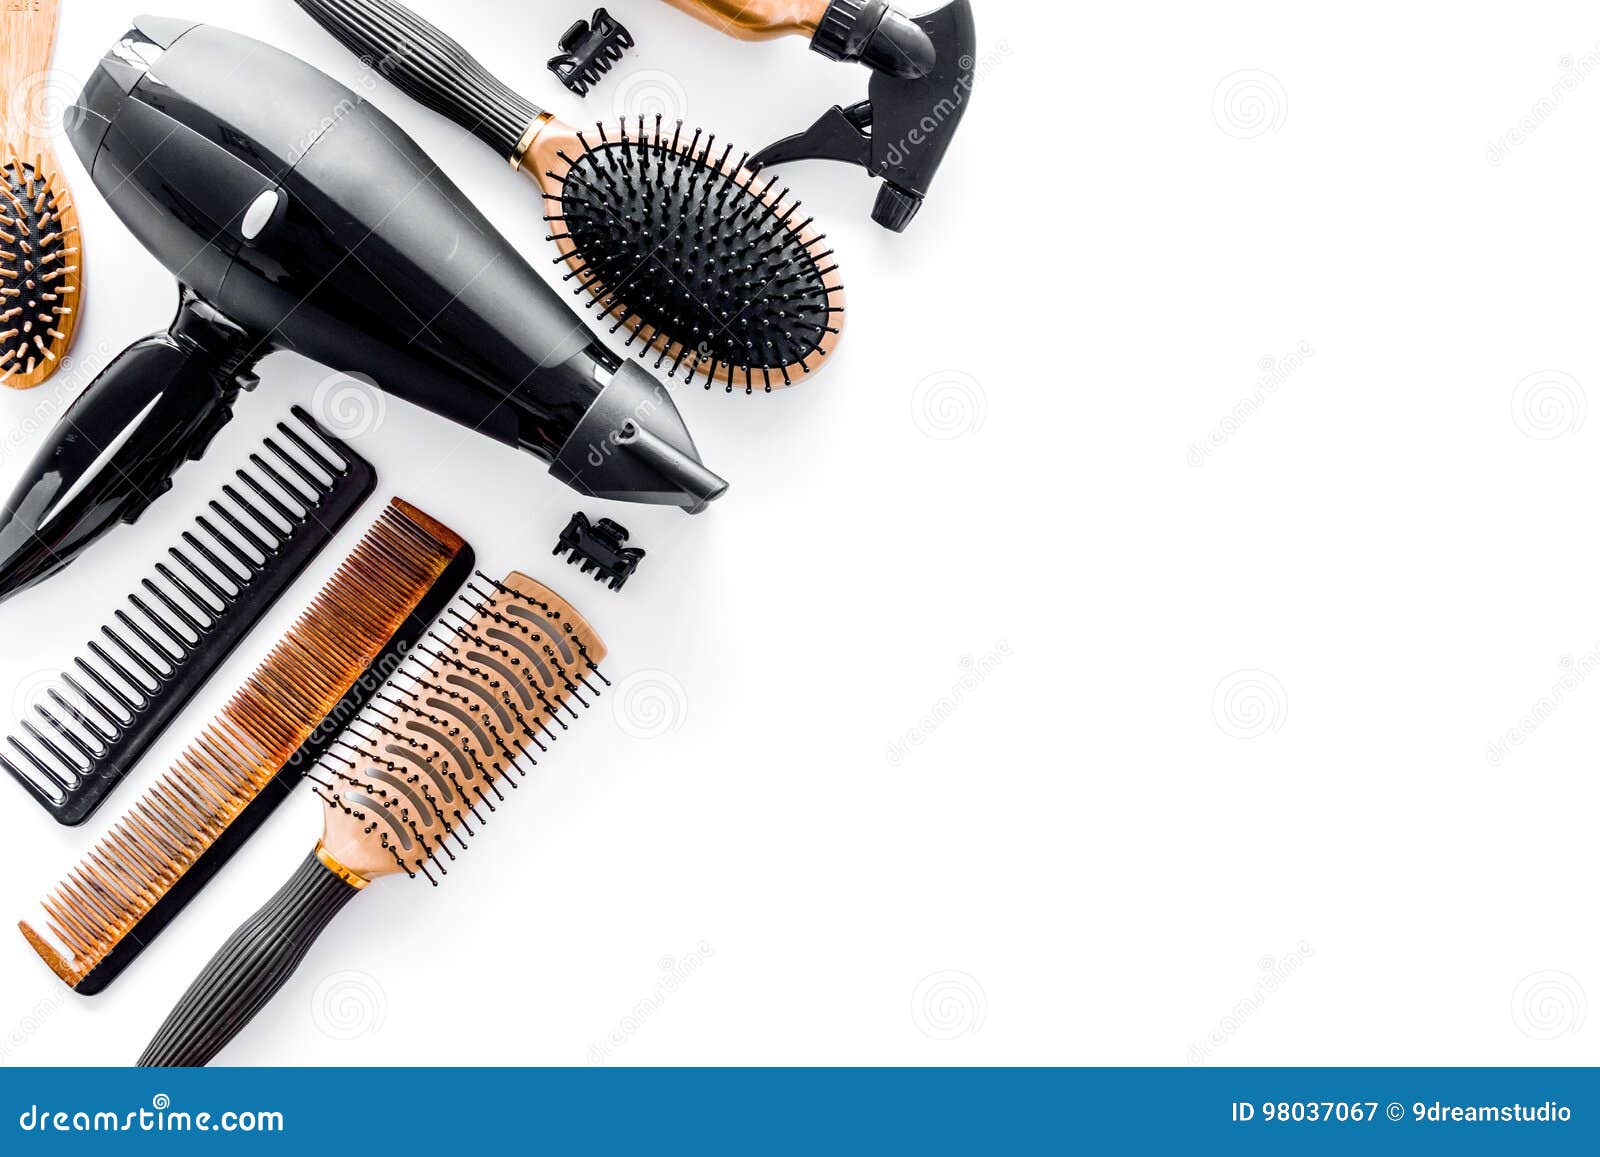 326,325 Salon Background Stock Photos - Free & Royalty-Free Stock Photos  from Dreamstime